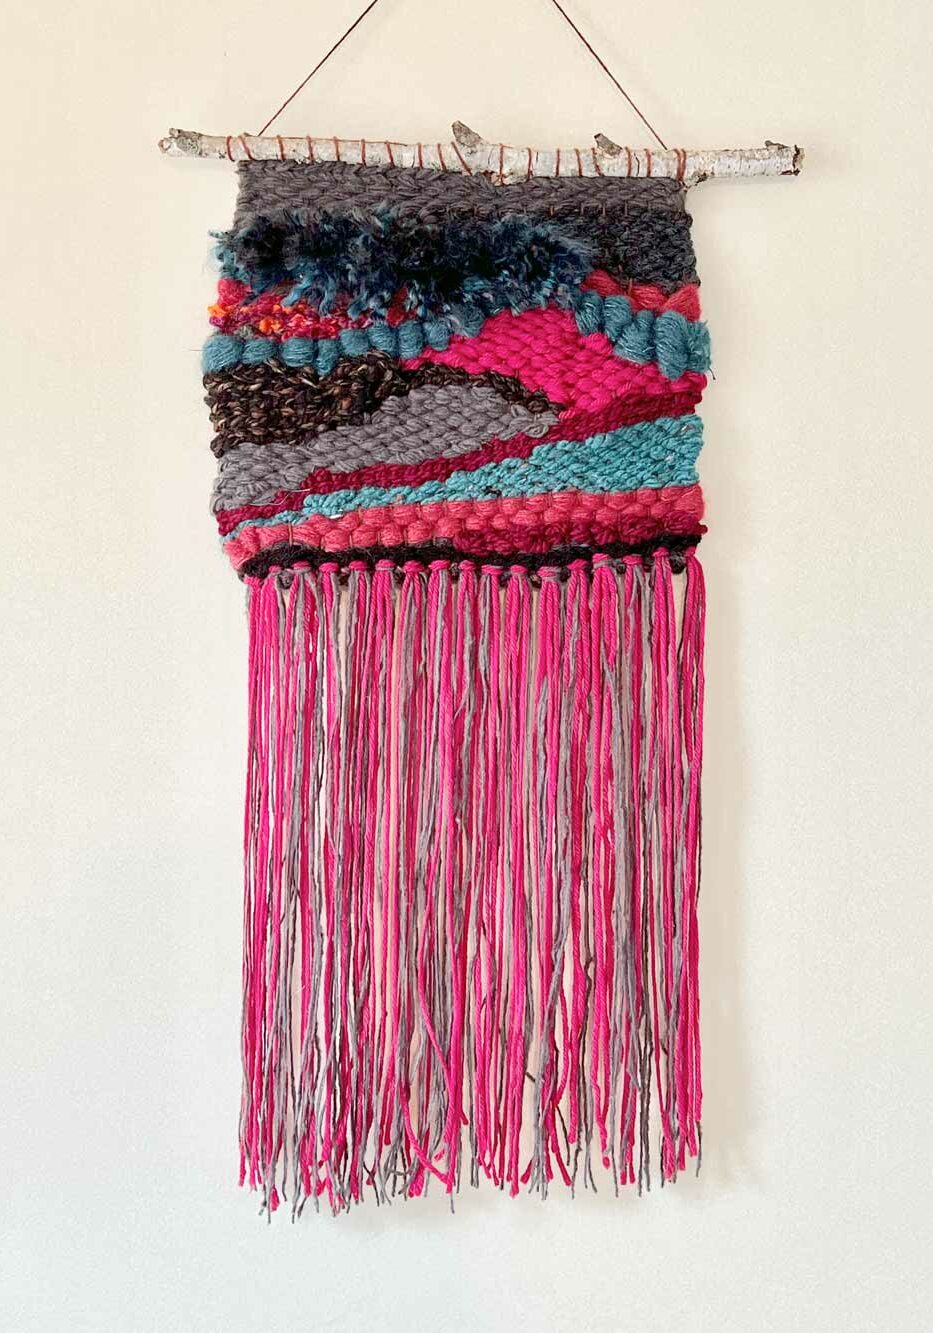 wallhanging-small-blues-pinks